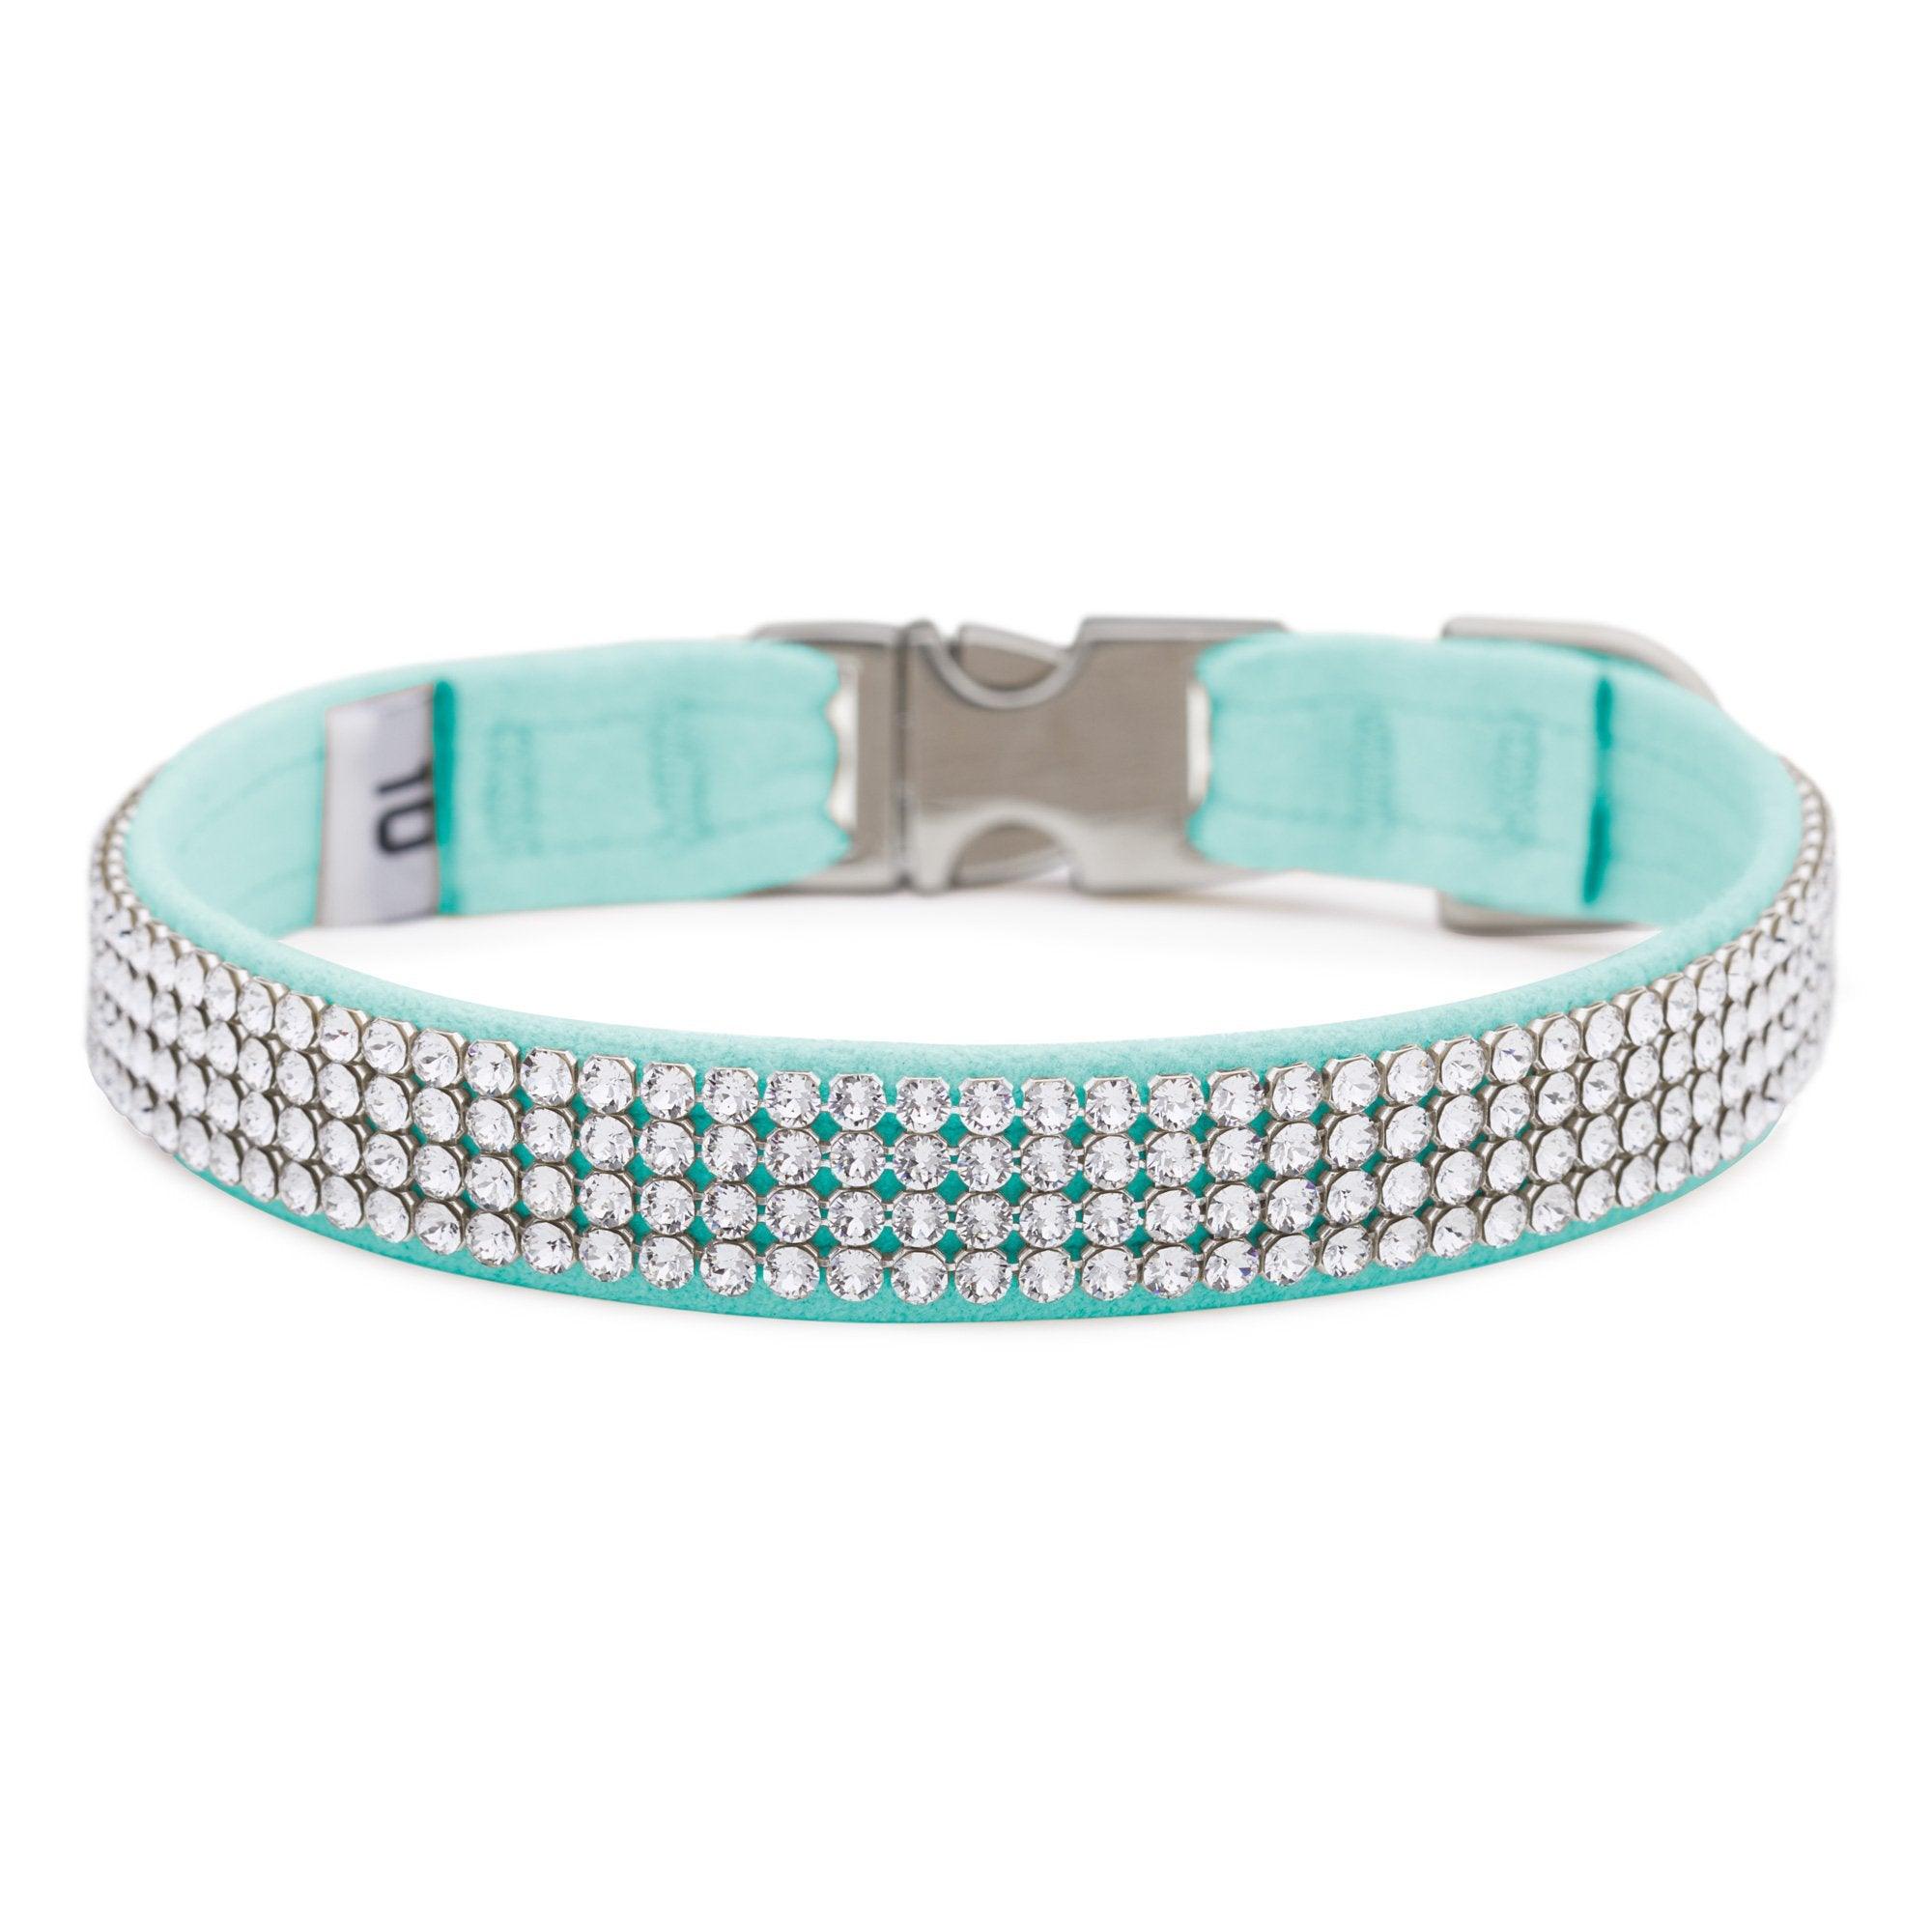 Tiffi Blue 4 Row Giltmore Perfect Fit Collar - Rocky & Maggie's Pet Boutique and Salon